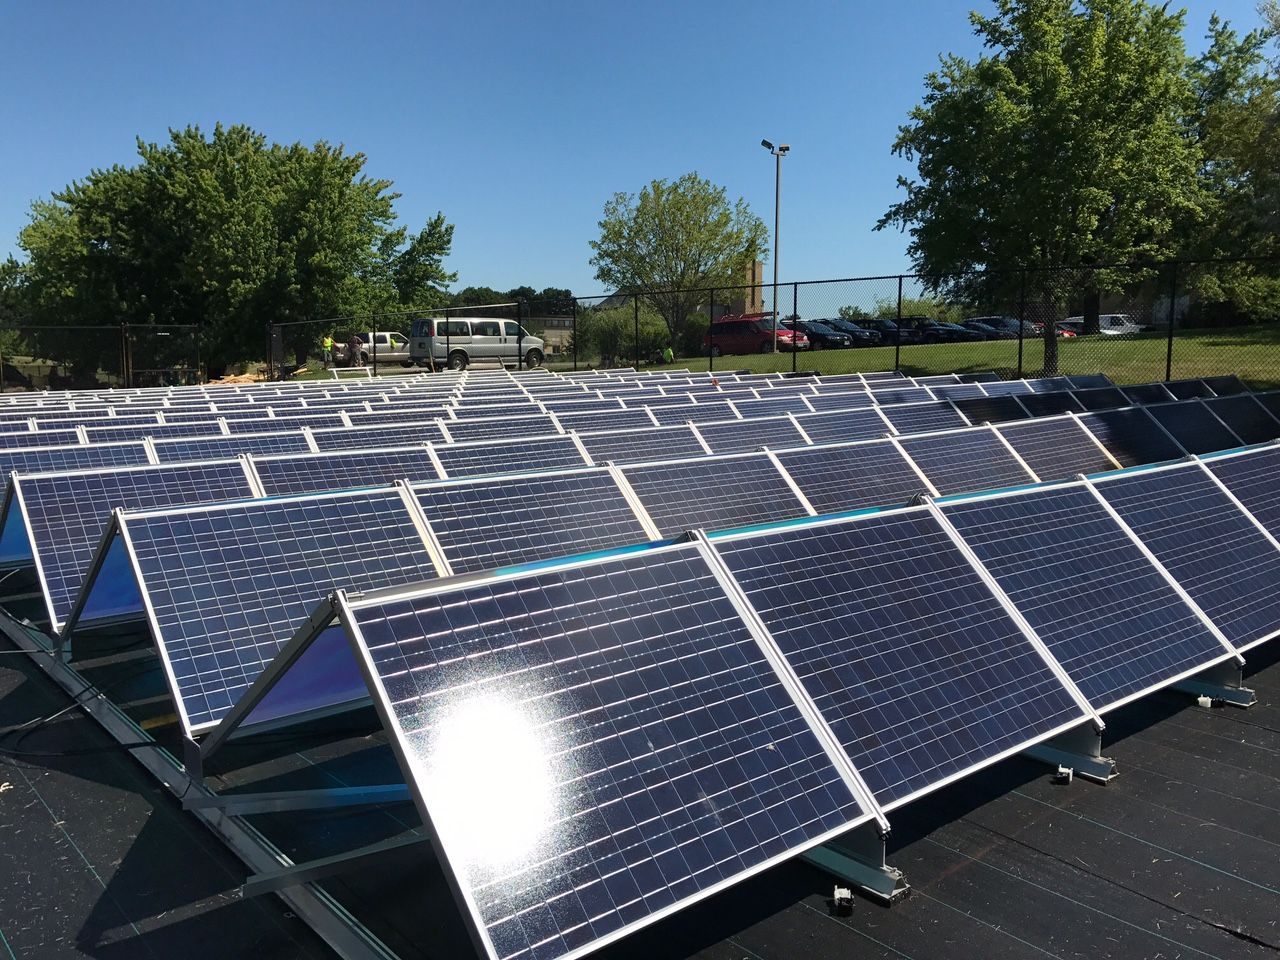 Solar panels installed at Tubman East